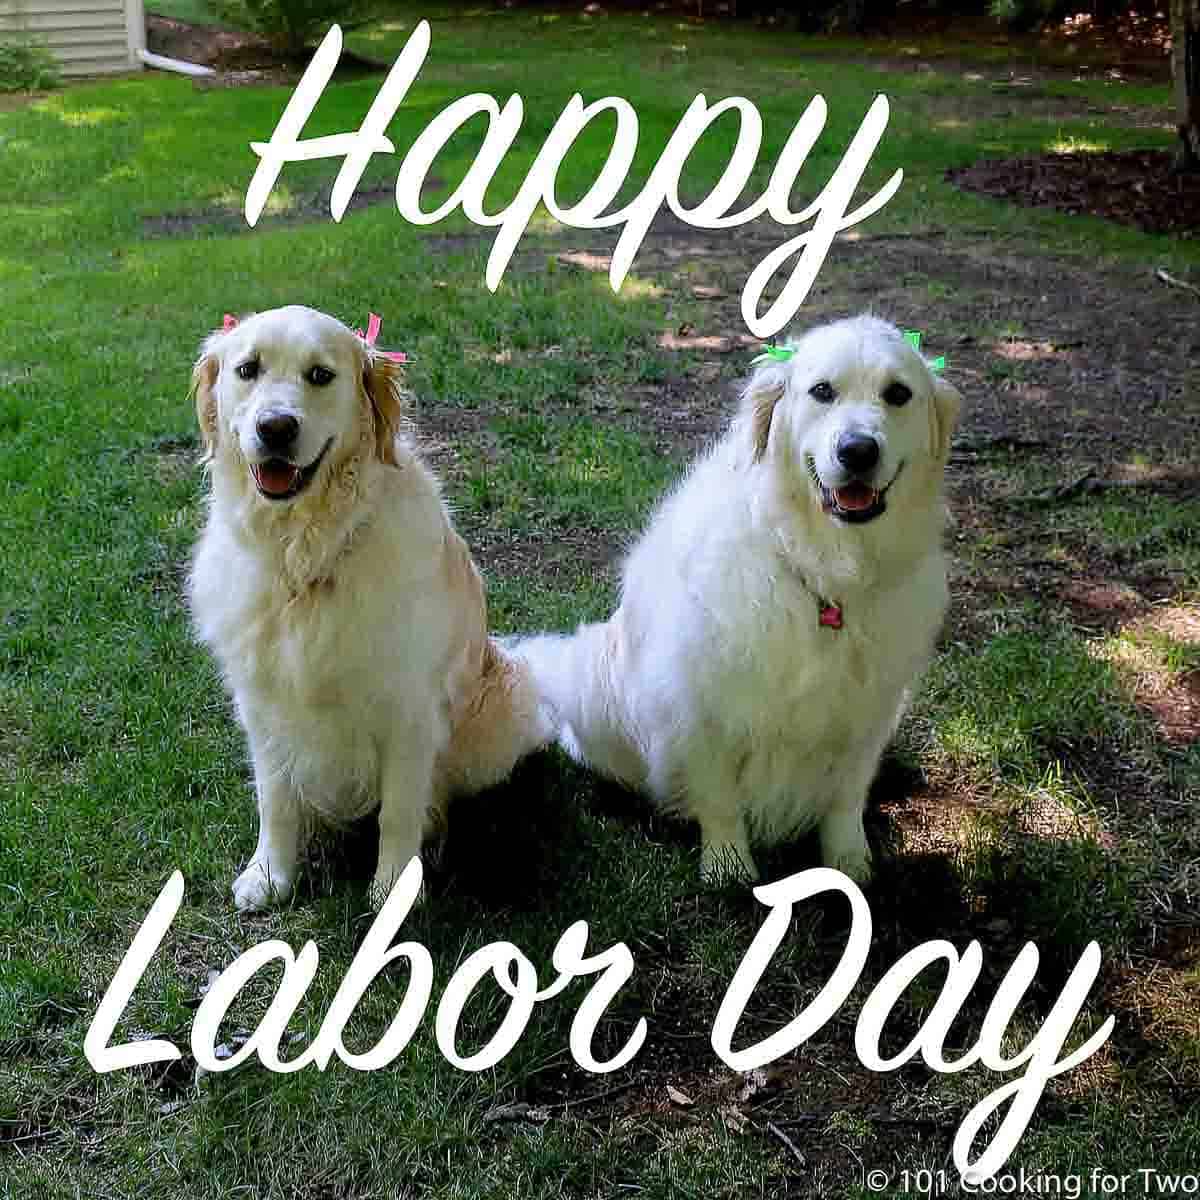 Labor Day graphic with dogs in bows